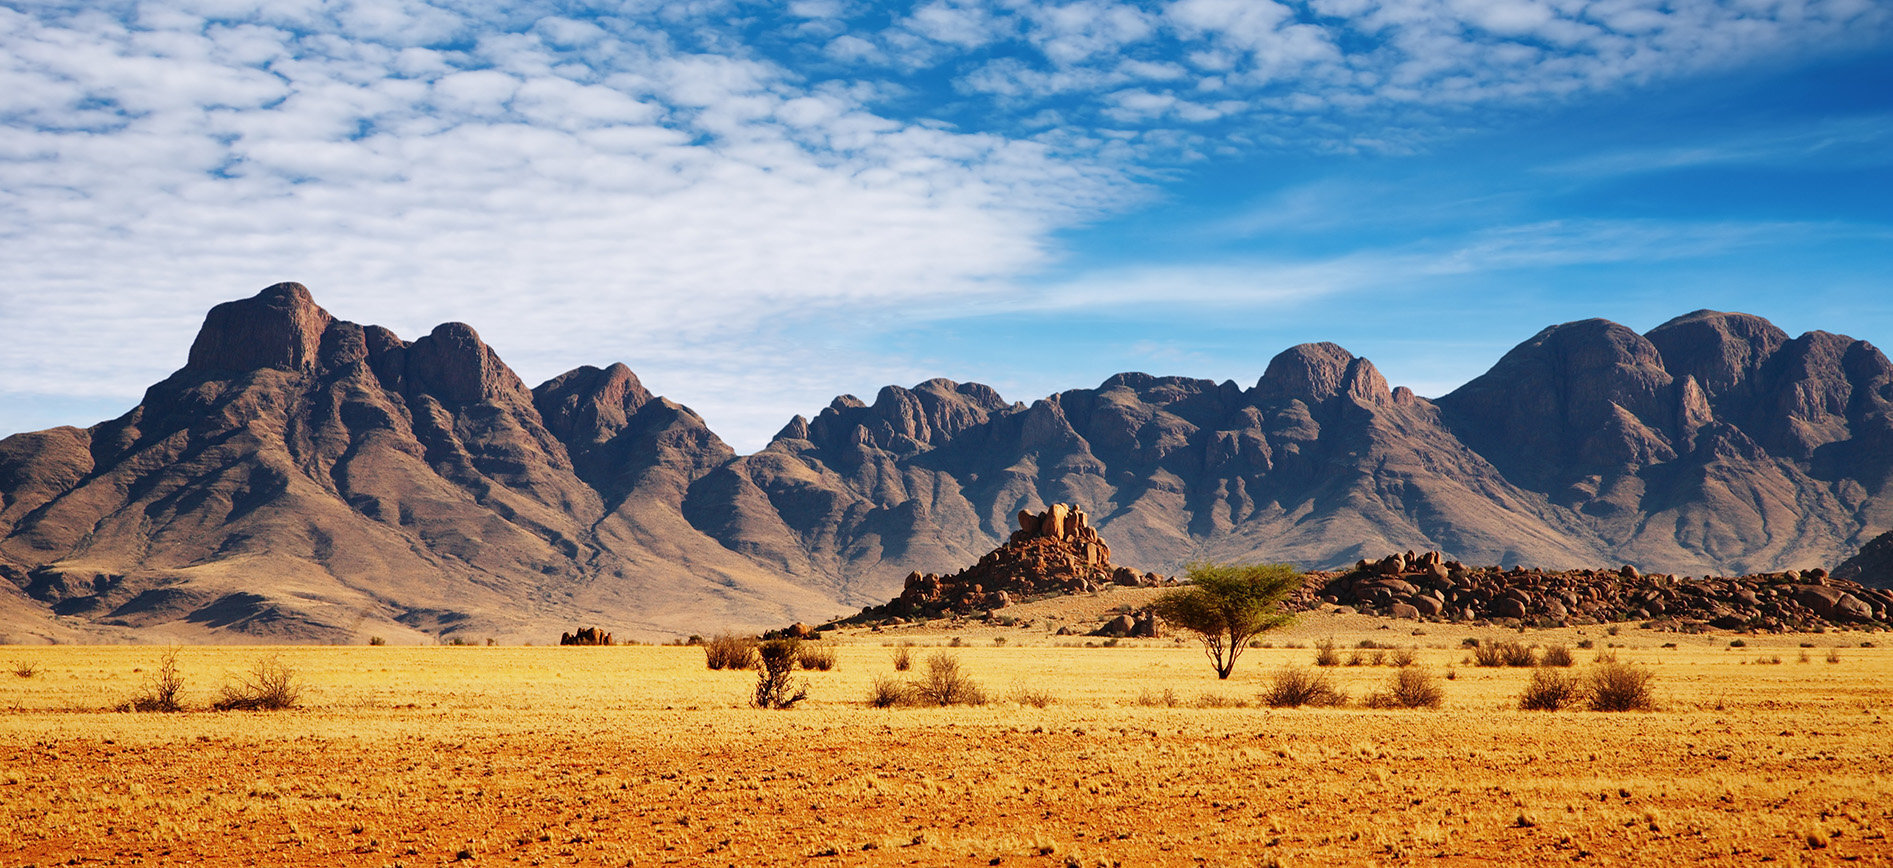 Namibia country edited